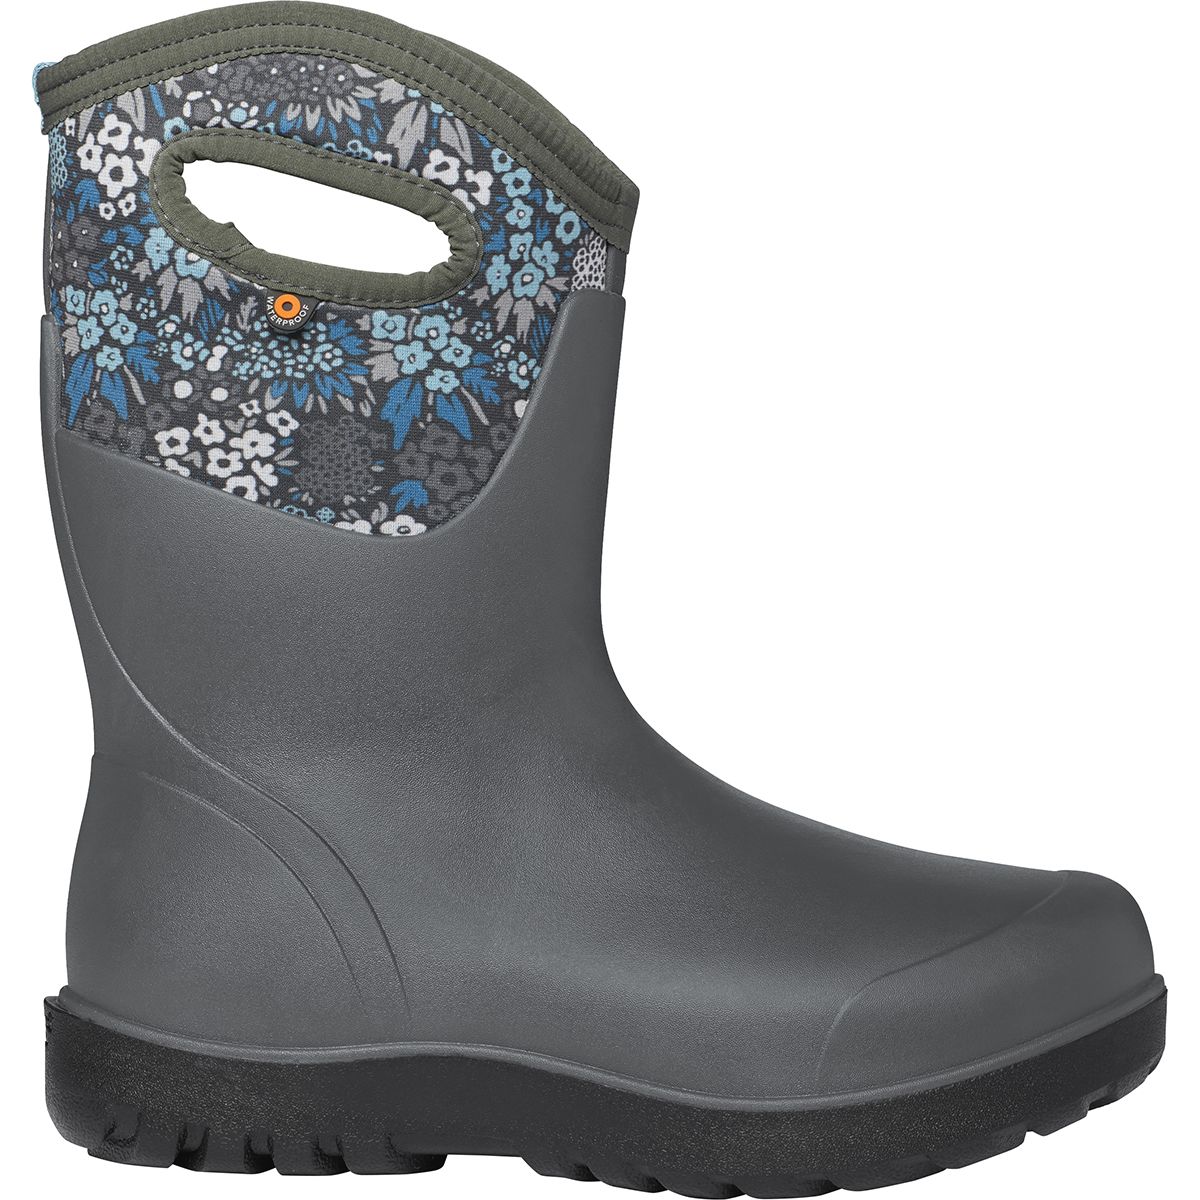 Neo-Classic Mid NW Garden Boot - Women's | Backcountry